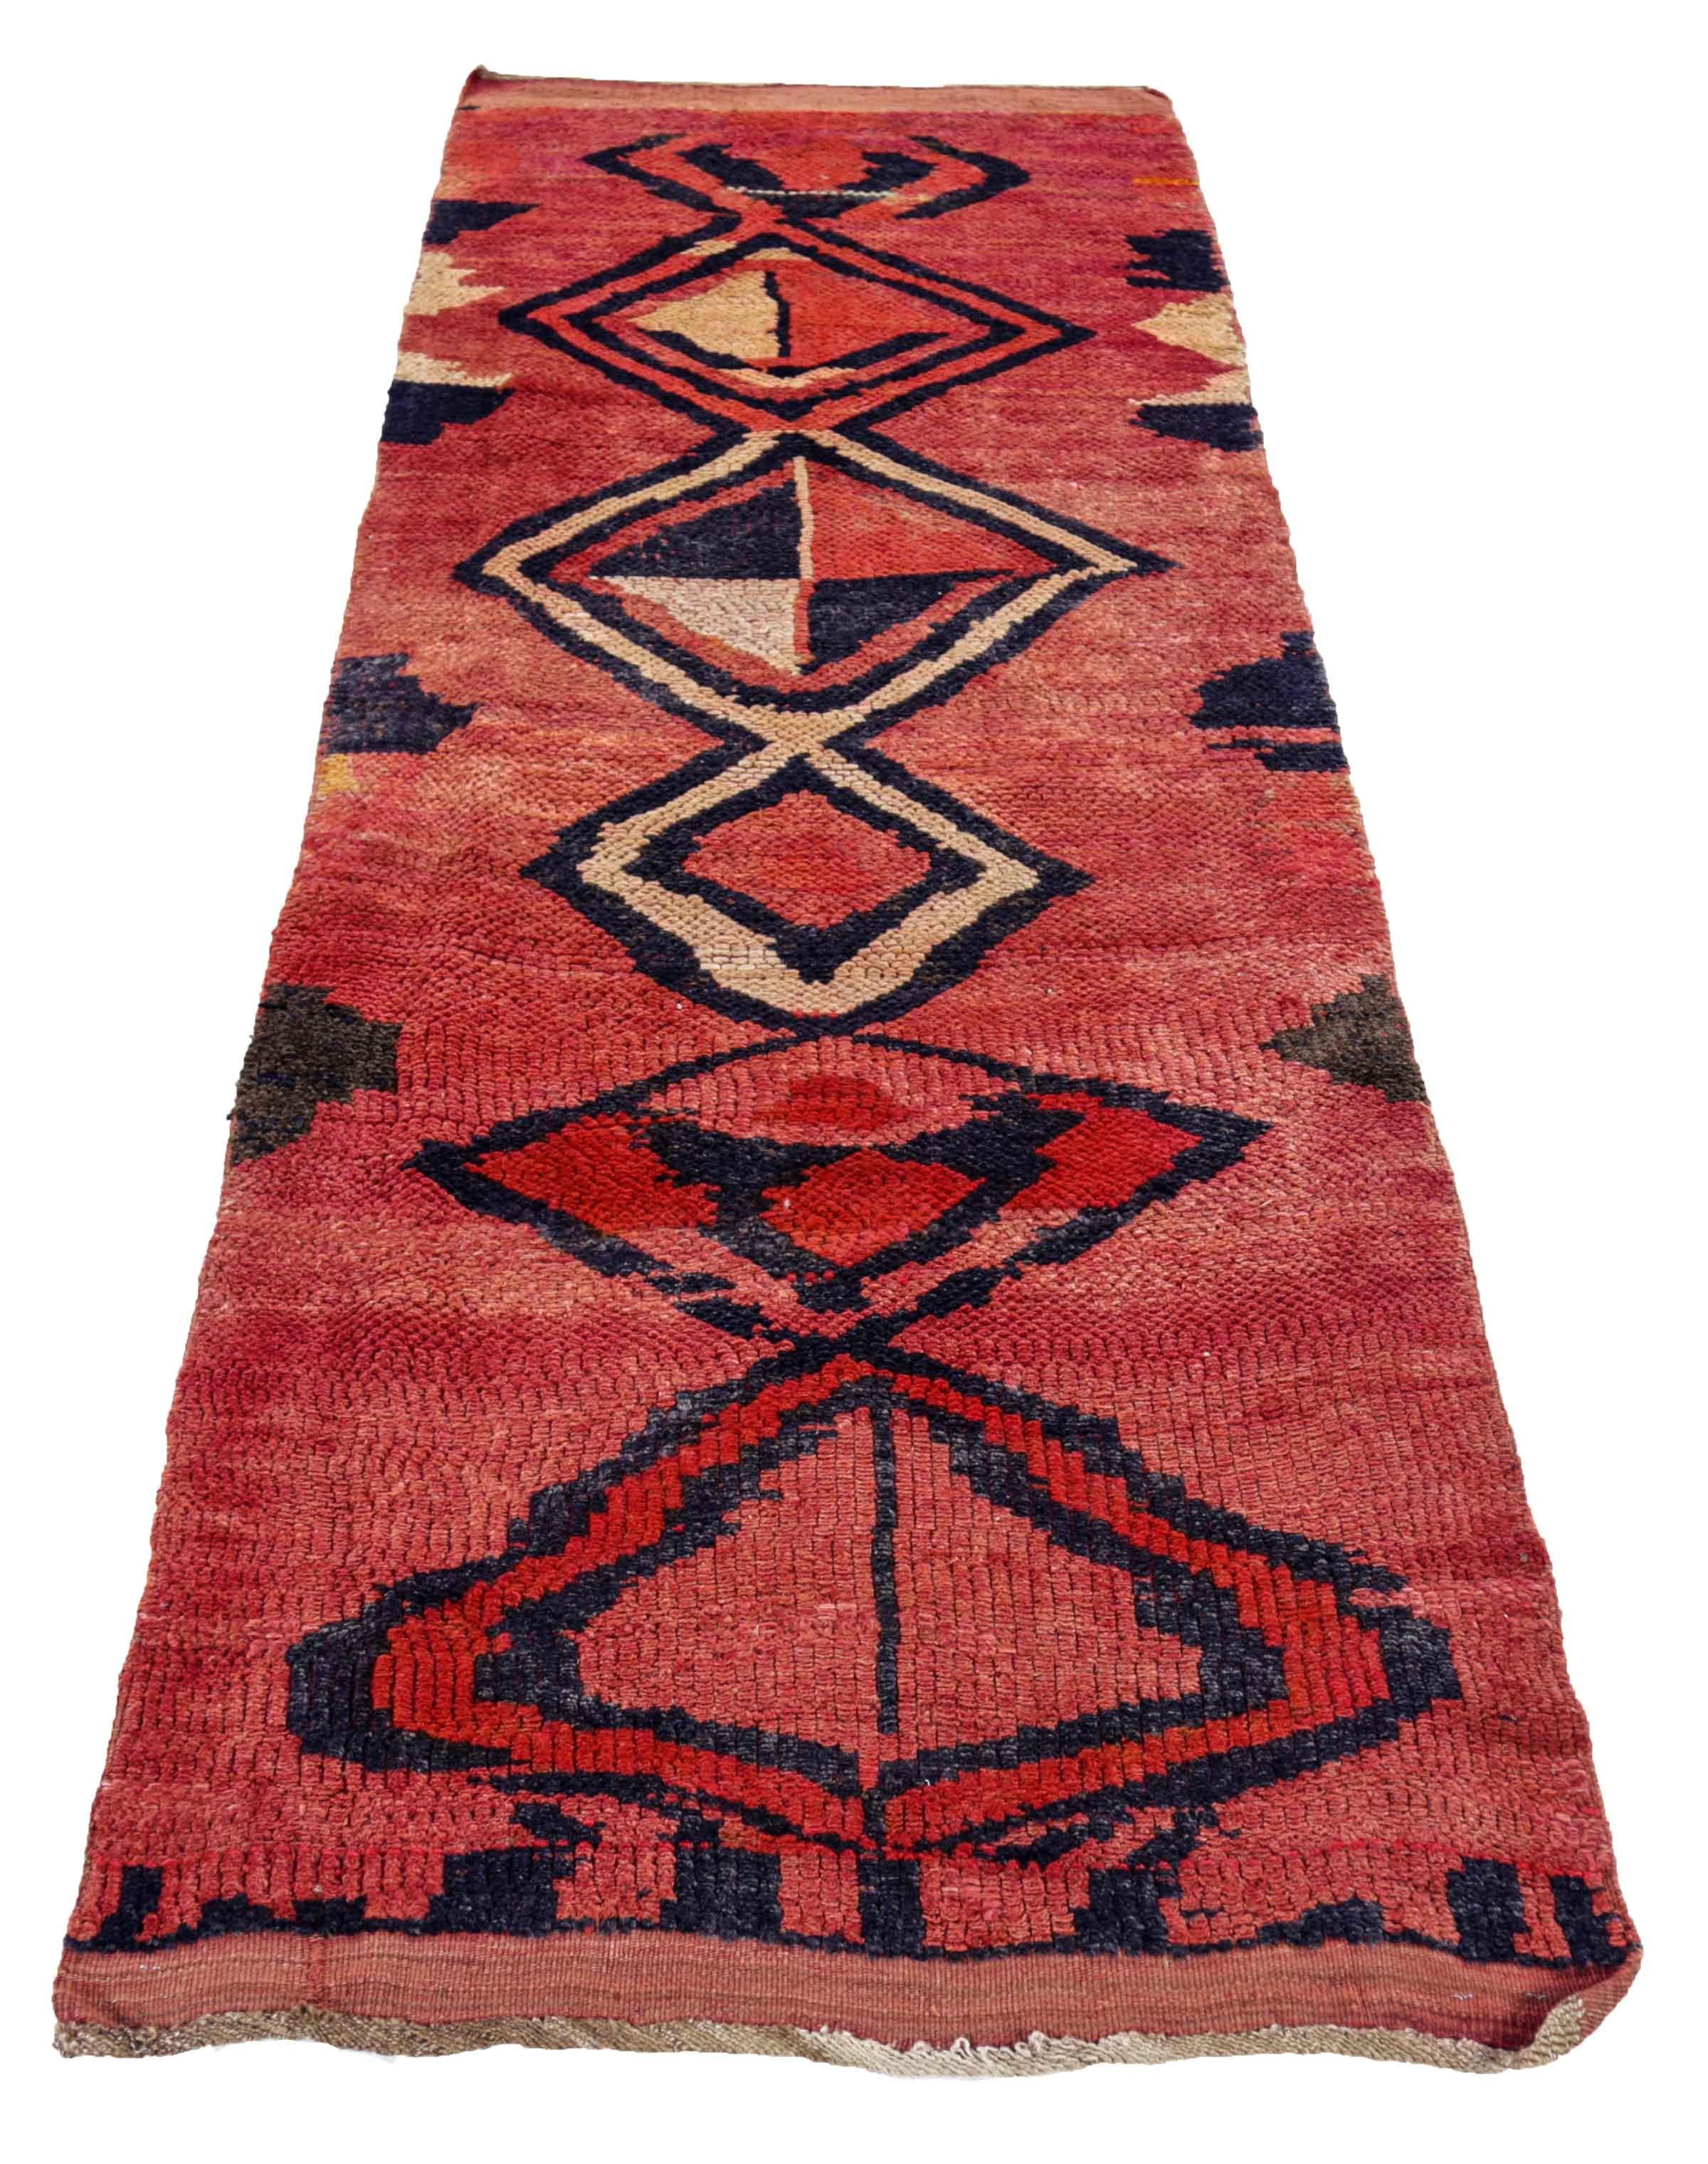 Antique Persian area rug handwoven from the finest sheep’s wool. It’s colored with all-natural vegetable dyes that are safe for humans and pets. It’s a traditional Gabbeh design handwoven by expert artisans. It’s a lovely area rug that can be